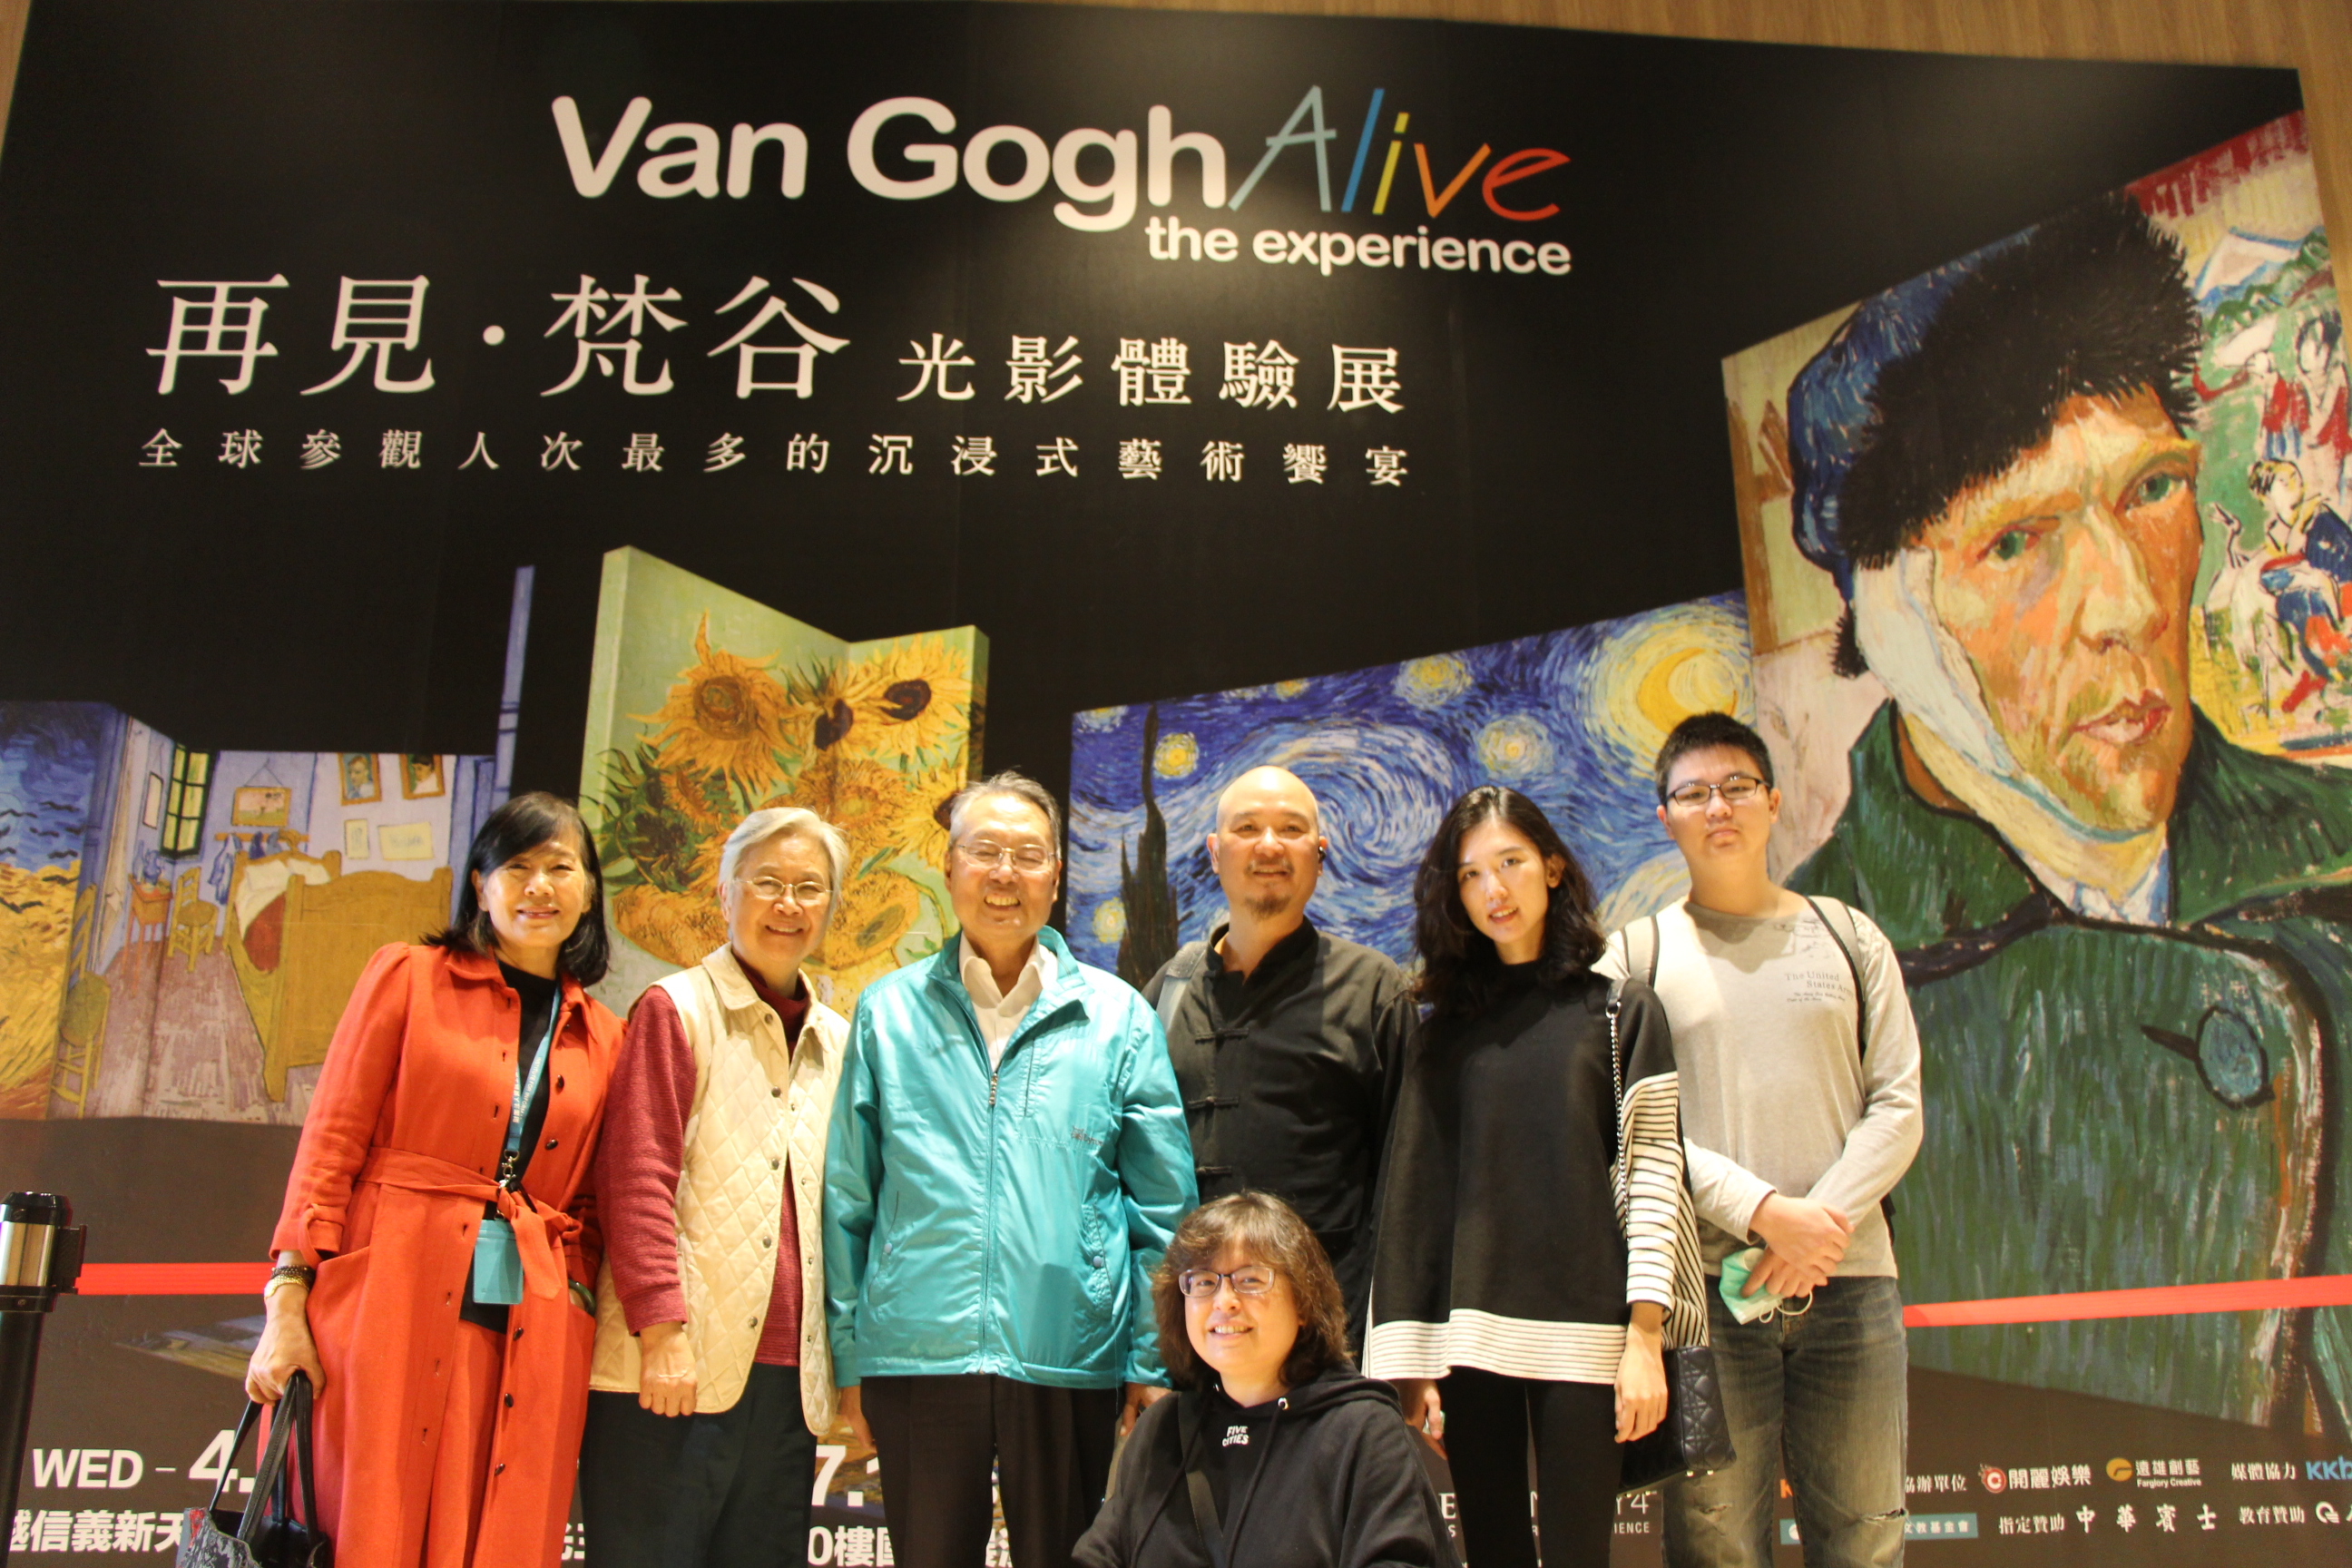 “Van Gogh Alive Exhibit” is super eye-catching. Taiwan’s first stand in Taipei! Chairperson of the Alliance leads the team to visit the exhibition.